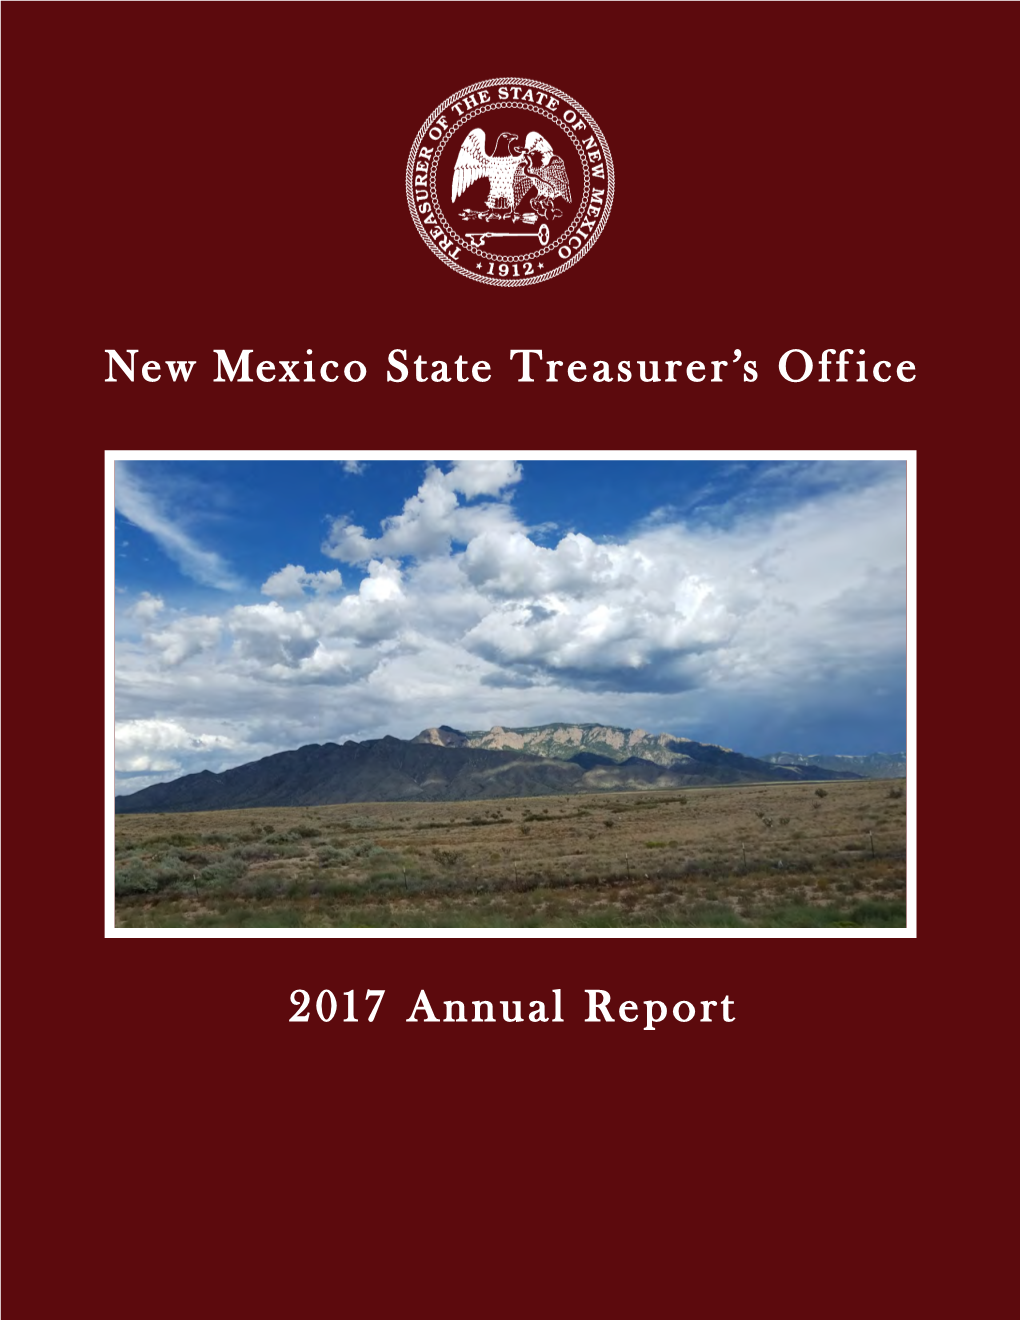 New Mexico State Treasurer's Office 2017 Annual Report